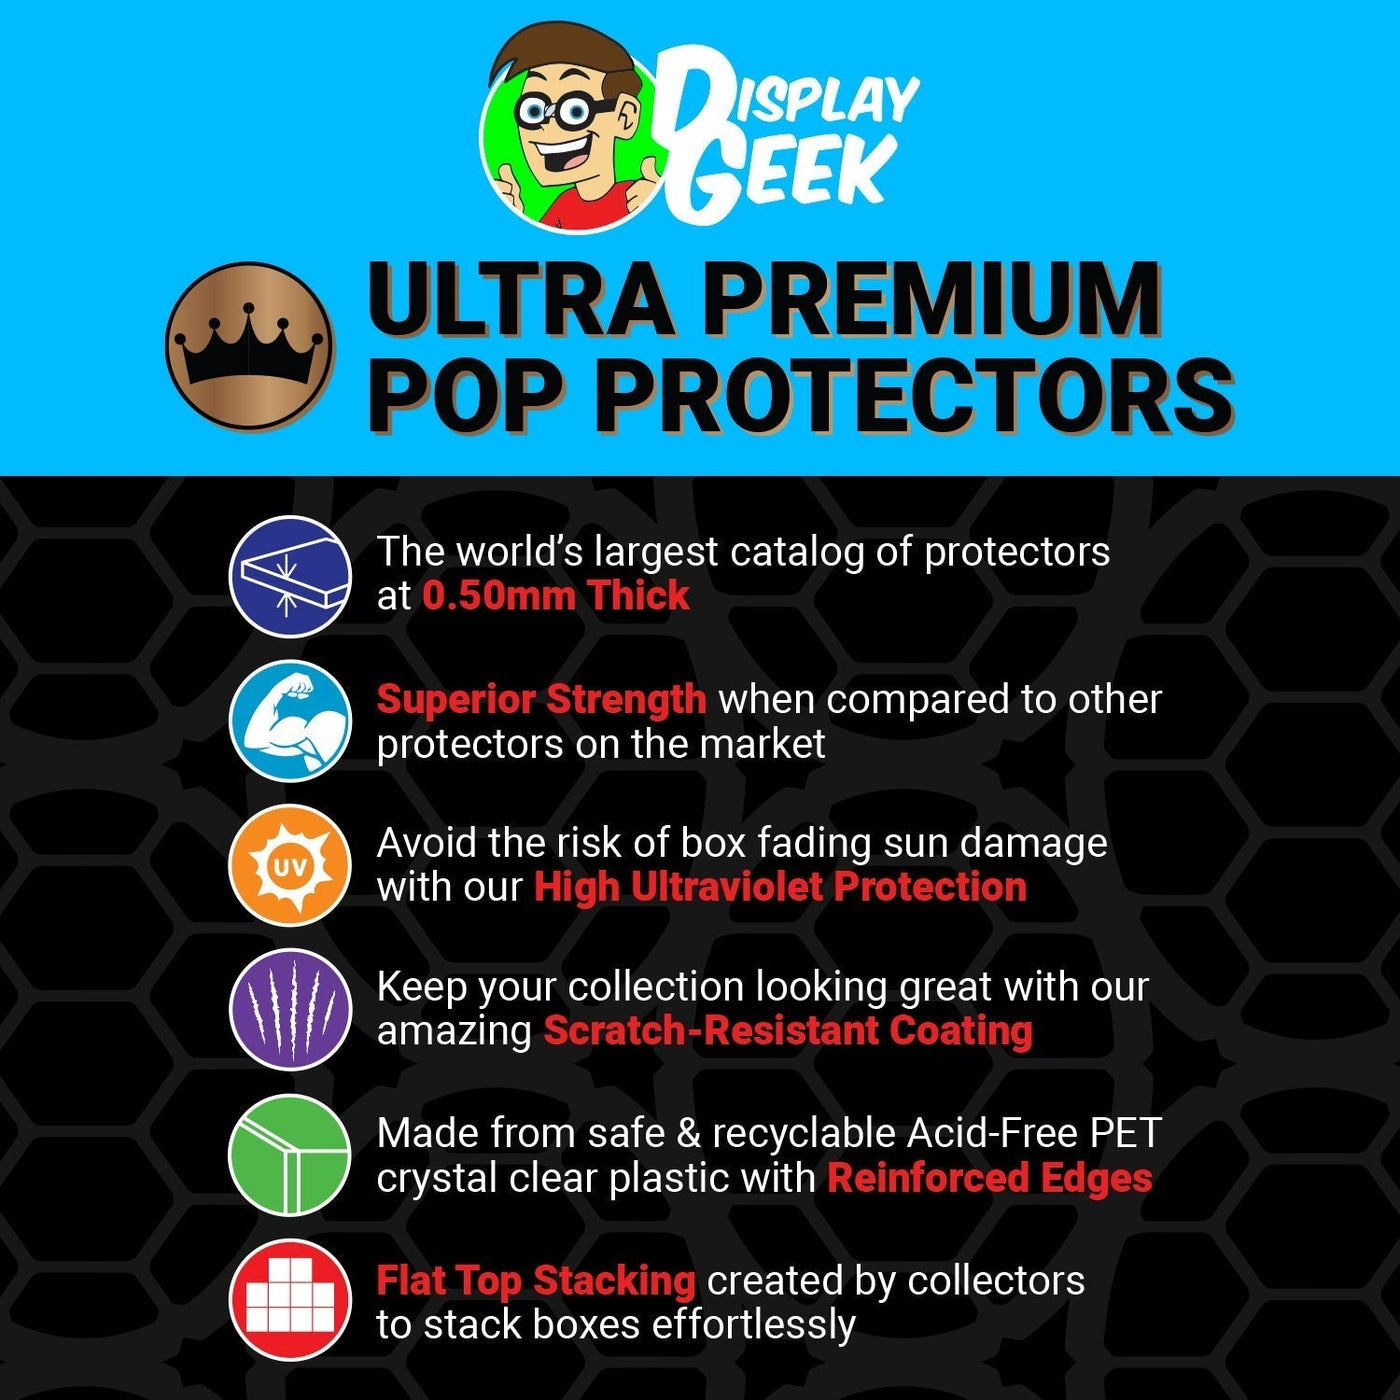 Pop Protector for 2 Pack Matthew Patel & Demon Chick SDCC Funko Pop on The Protector Guide App by Display Geek